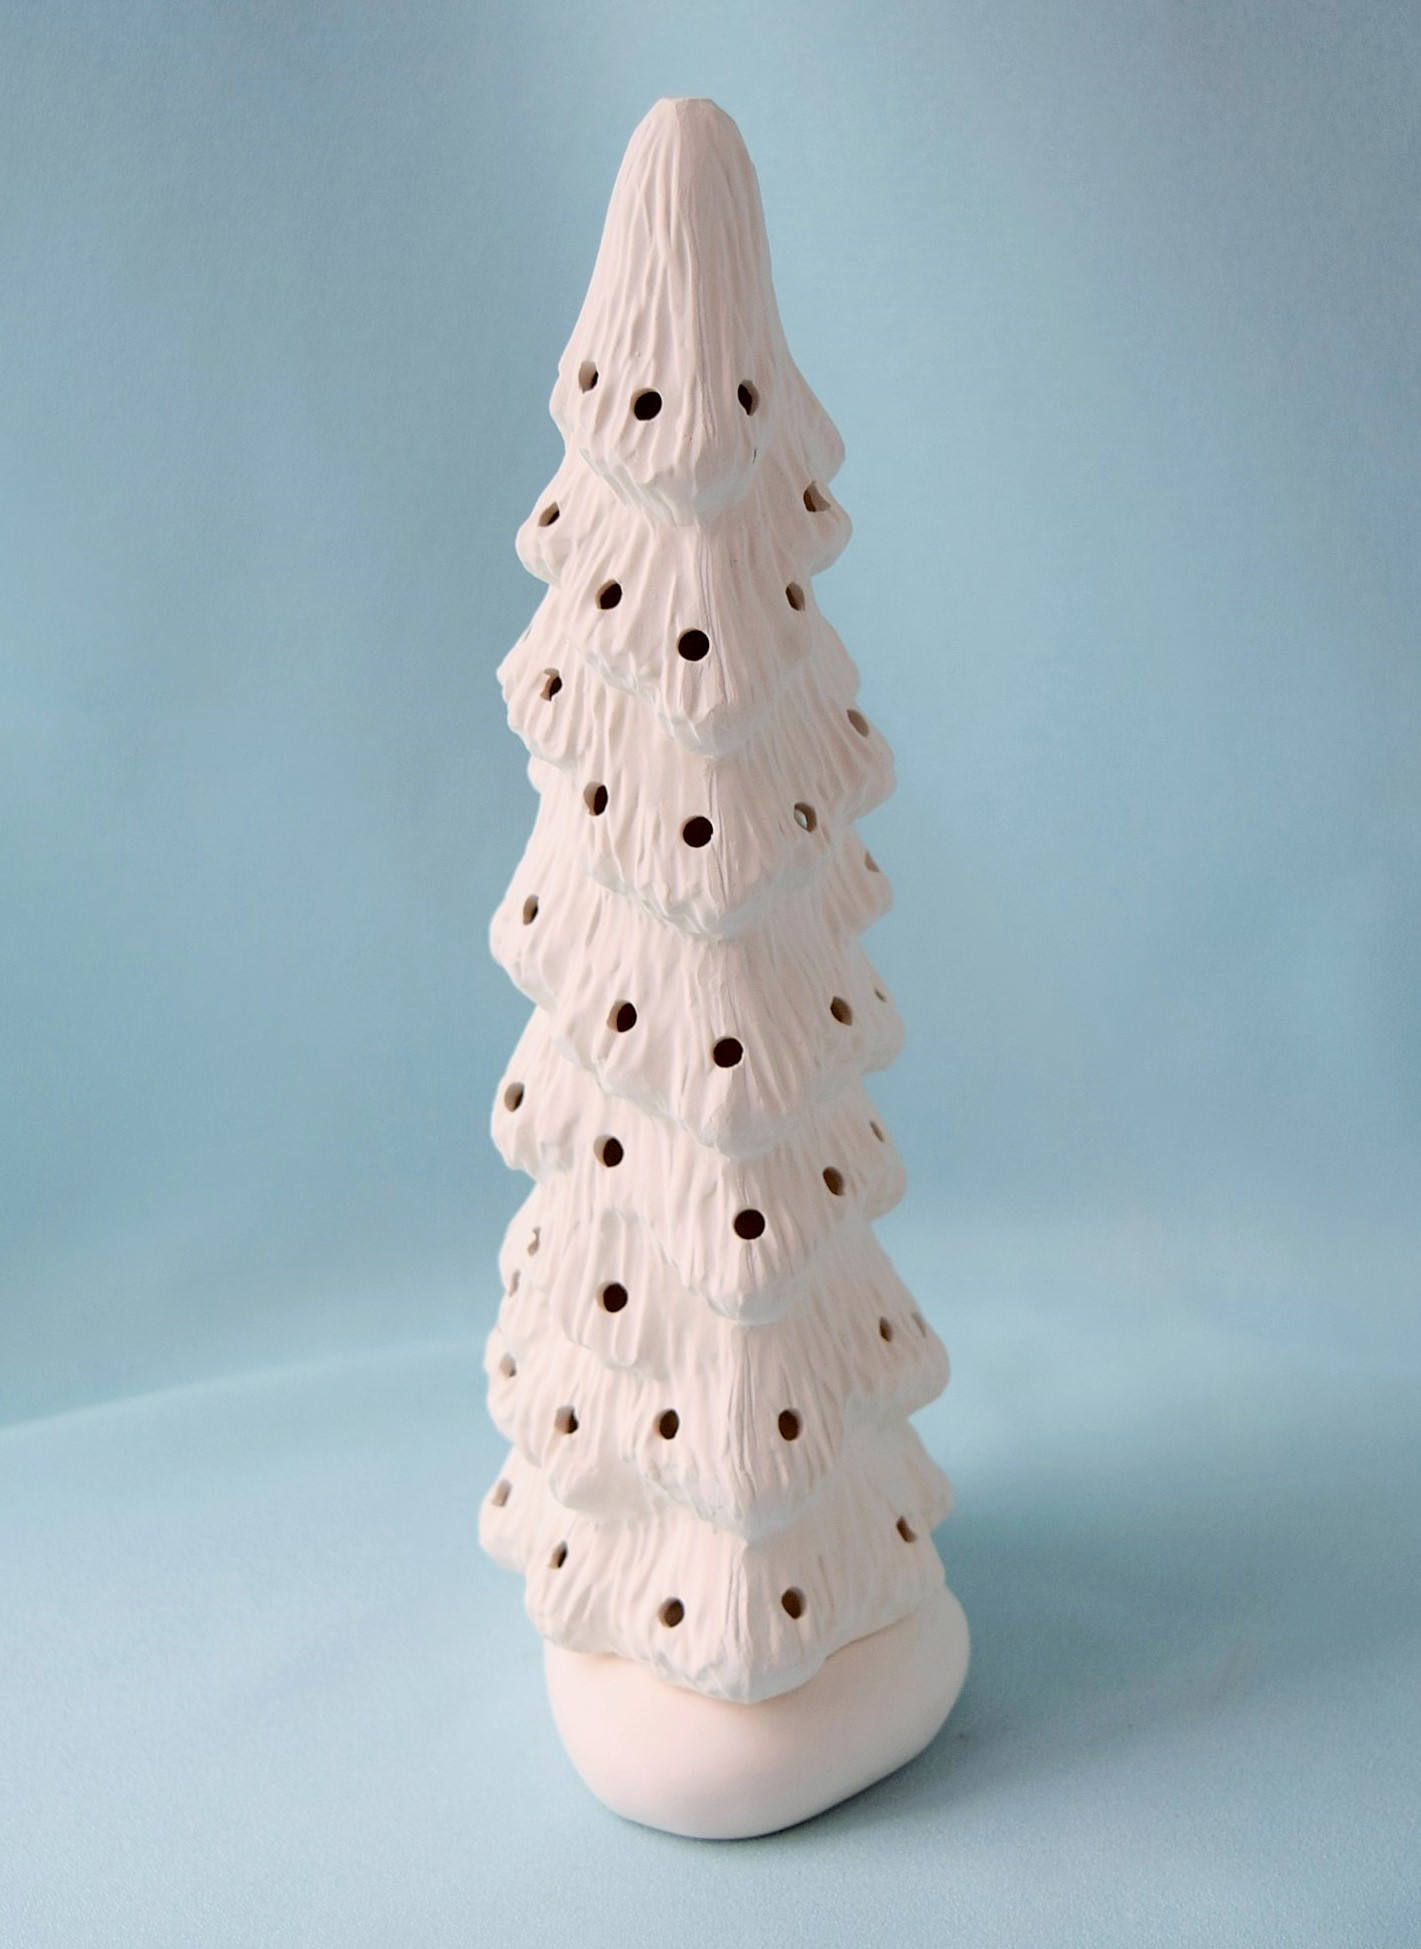 Ceramic Christmas tree in bisque - Slim Christmas Tree - 9 inches tall -  Tree - Ready to paint - Painting project - DIY ceramics